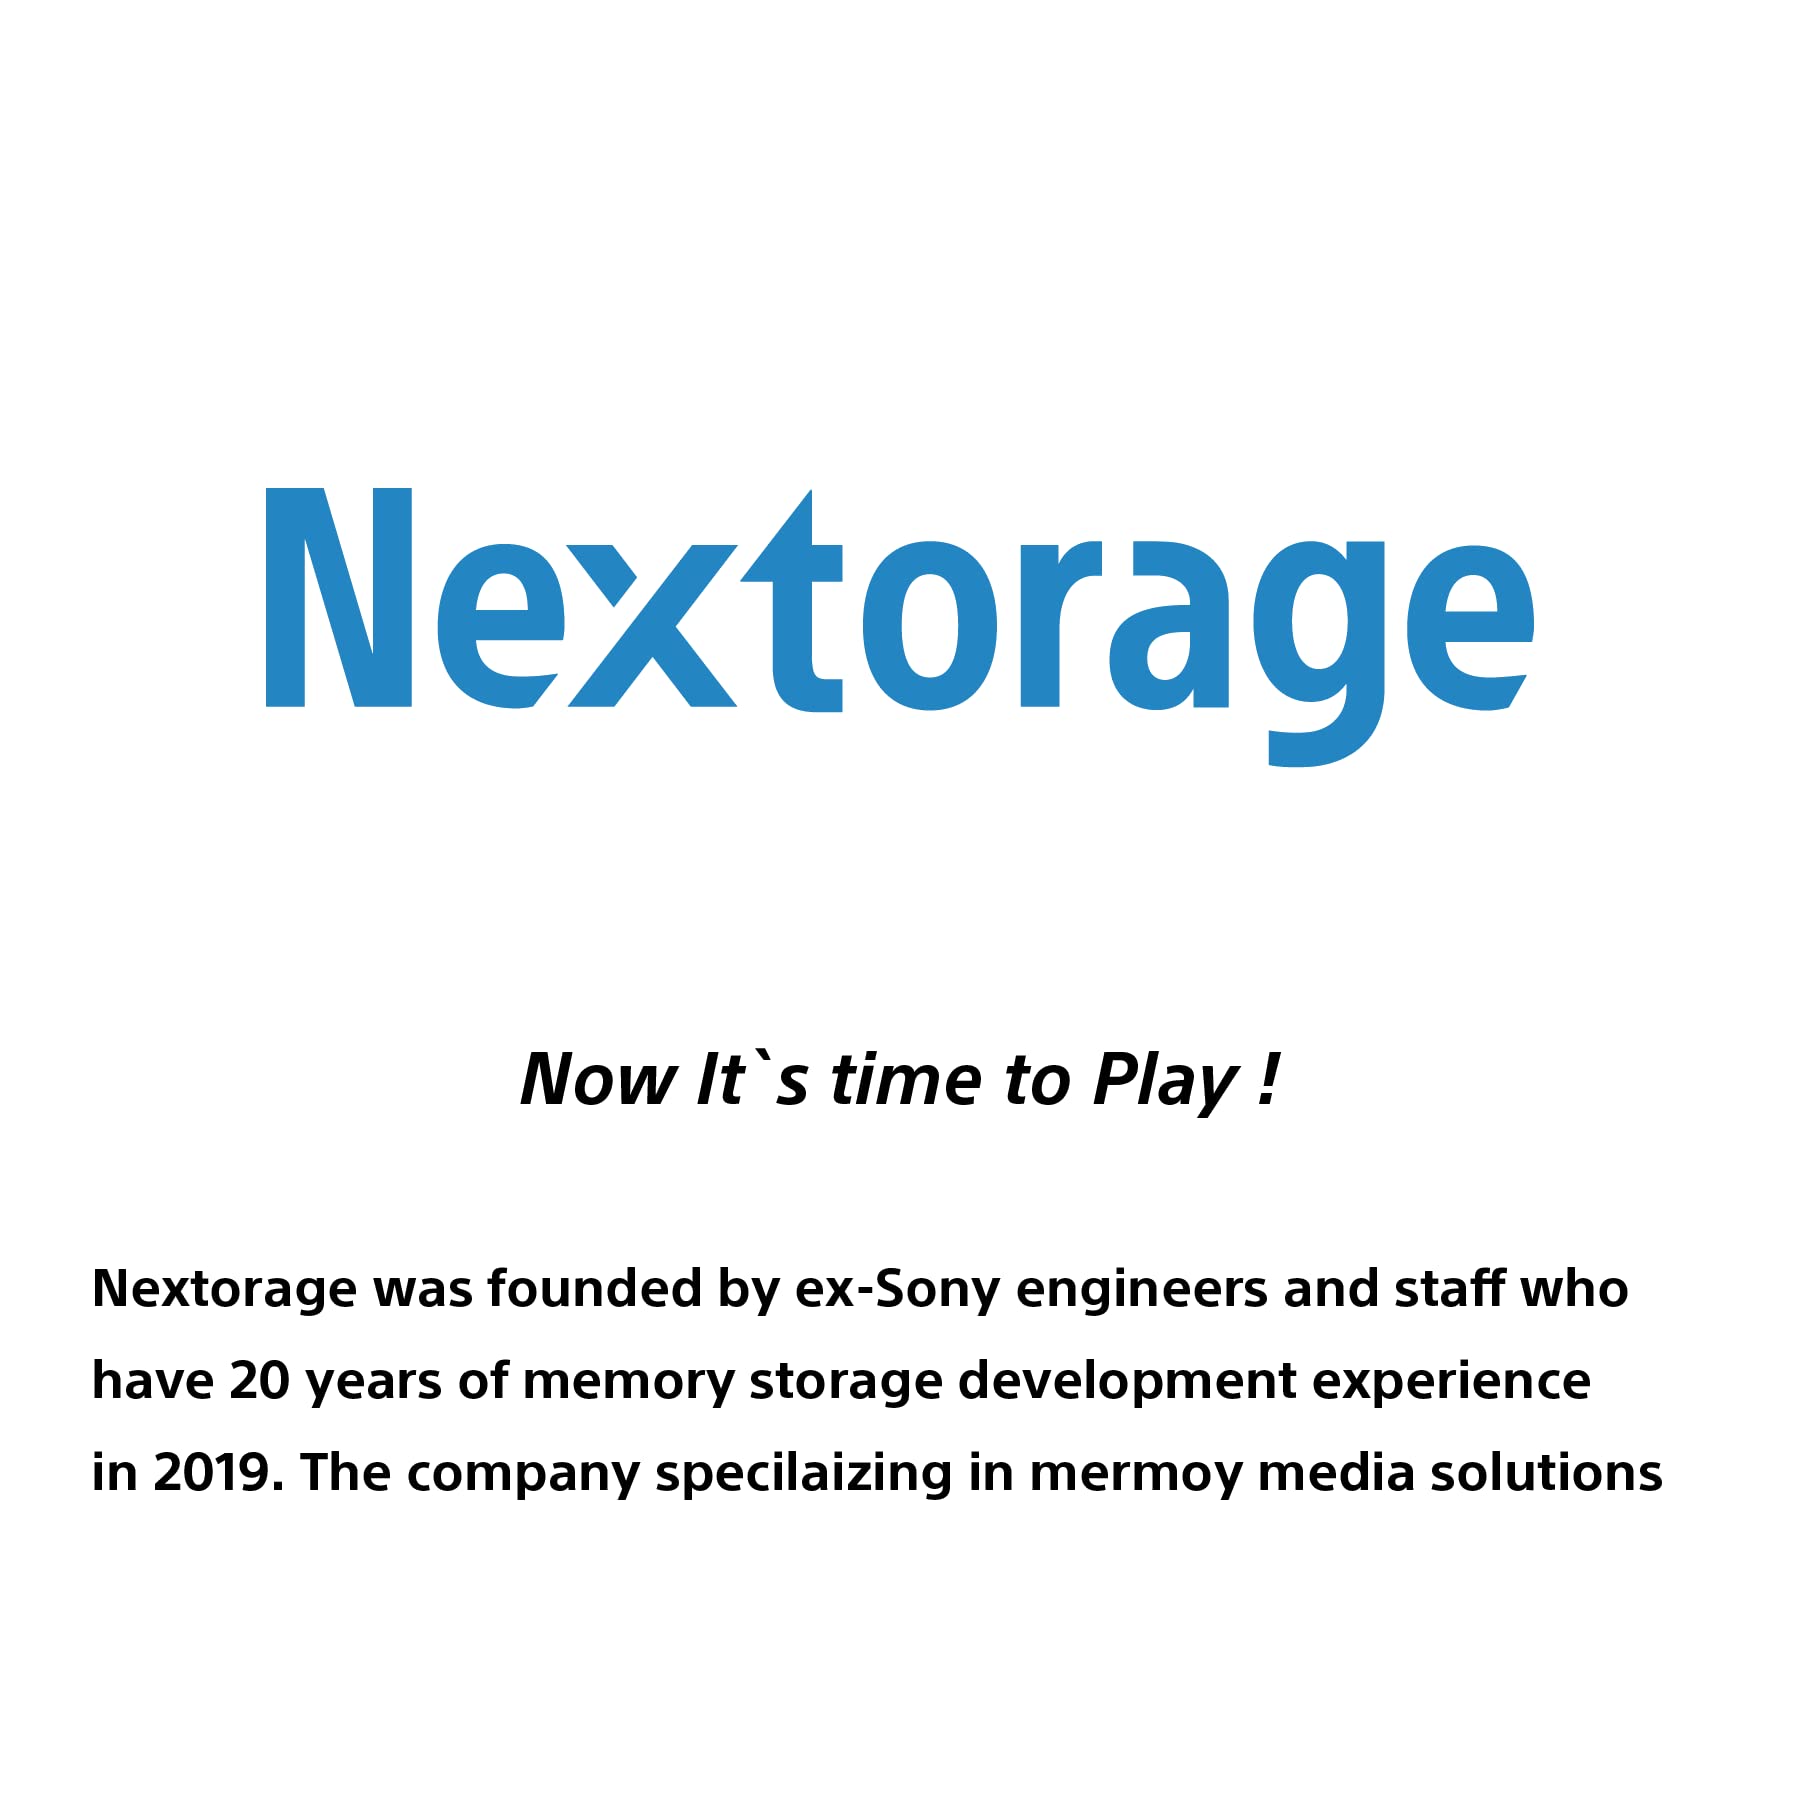 Nextorage Japan 2TB Internal SSD Work with Playstation 5 and PC M.2 2280 with Heatsink PCIe Gen4.0 NVMe NEM-PA2TB/N SYM Maximum Transfer Rate Read: 7300MB/s, Write: 6900MB/s Solid State Drive